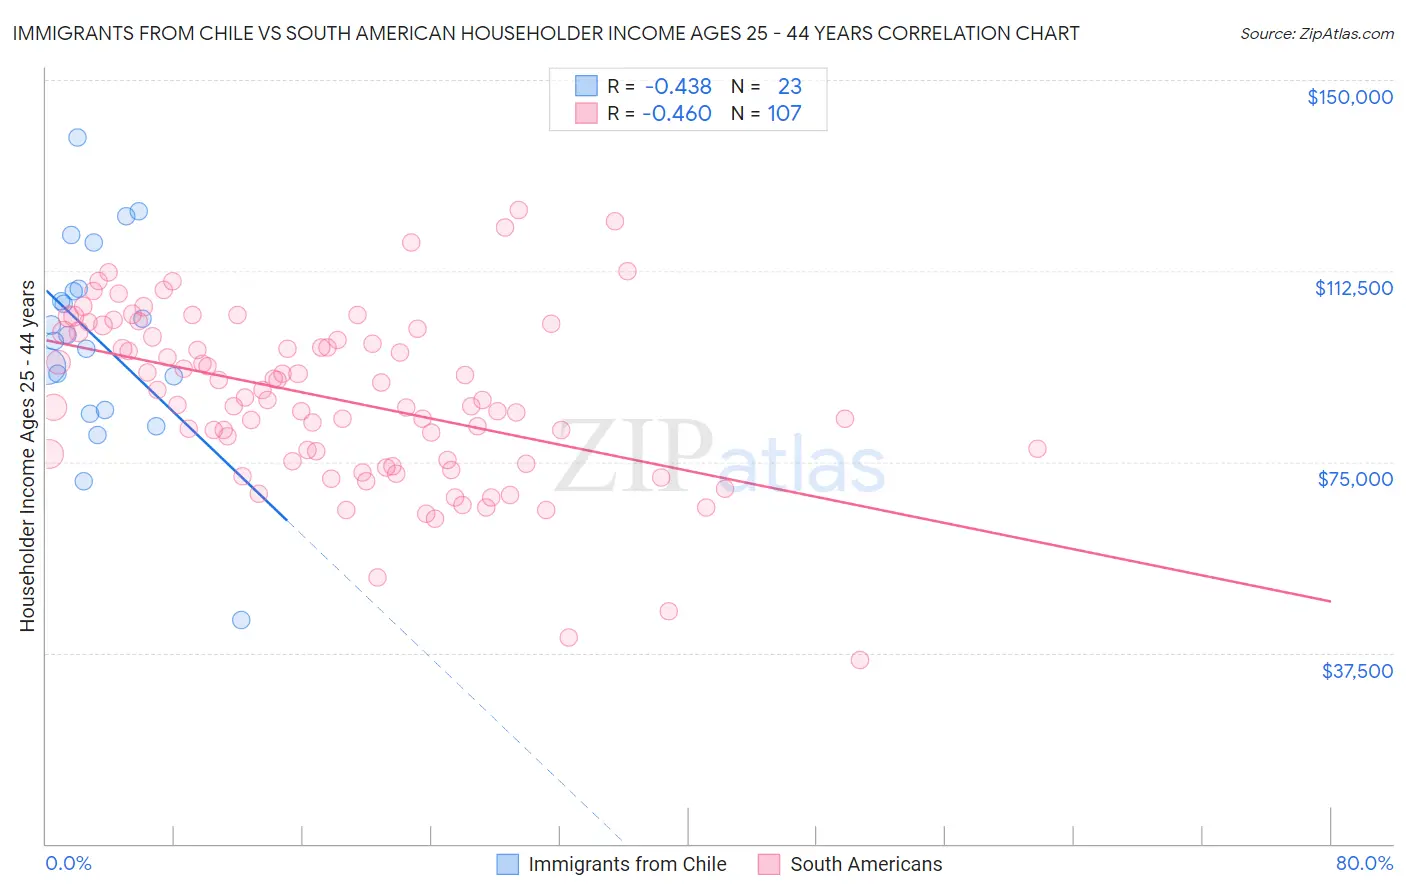 Immigrants from Chile vs South American Householder Income Ages 25 - 44 years